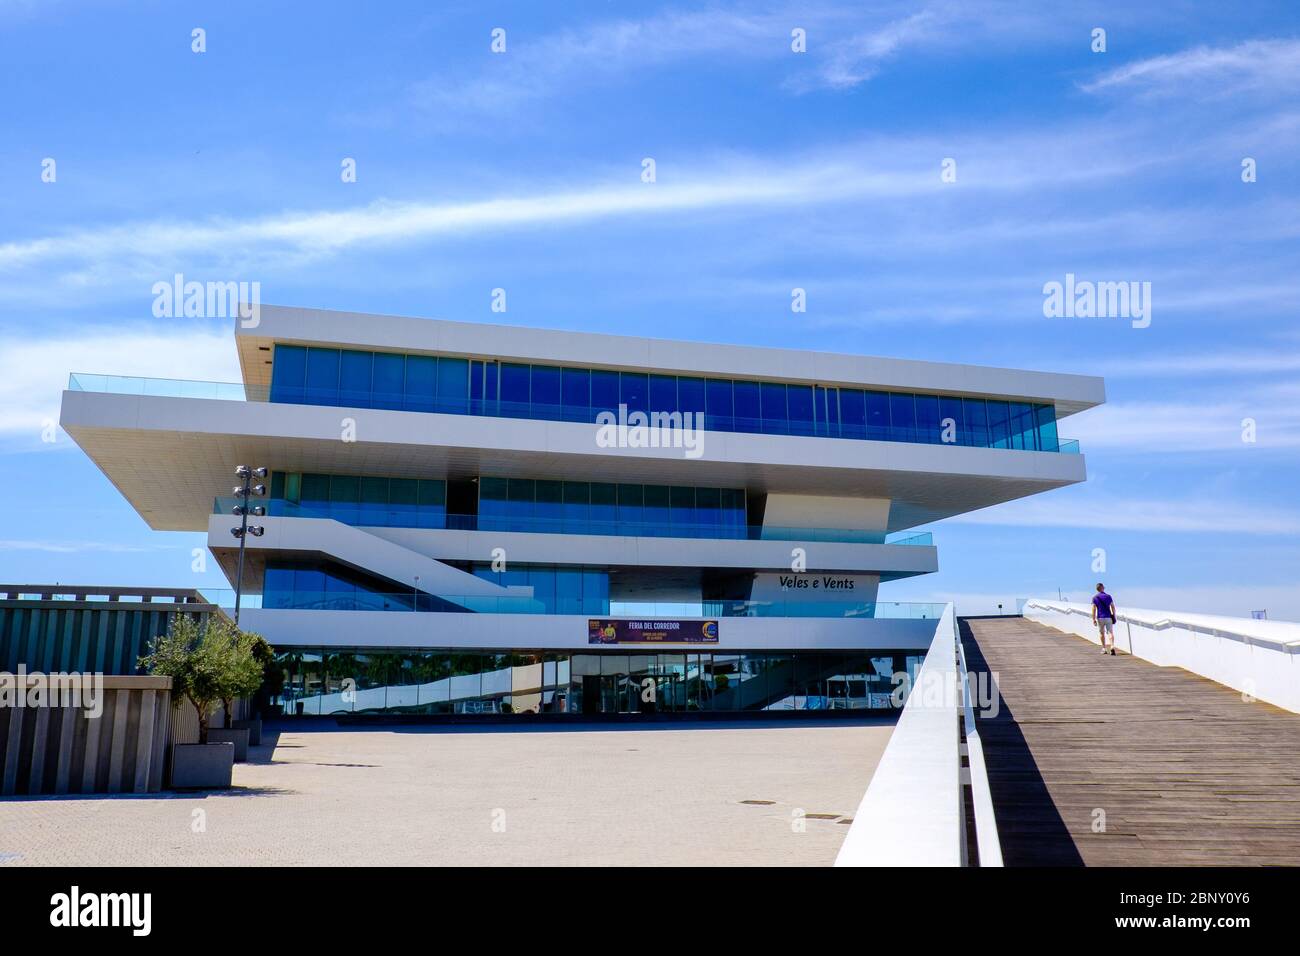 Valencia, Spain: June 14, 2015 - Structure built to allow an optimal view of the 2007 America's Cup is made up of four geometrically and dynamically c Stock Photo